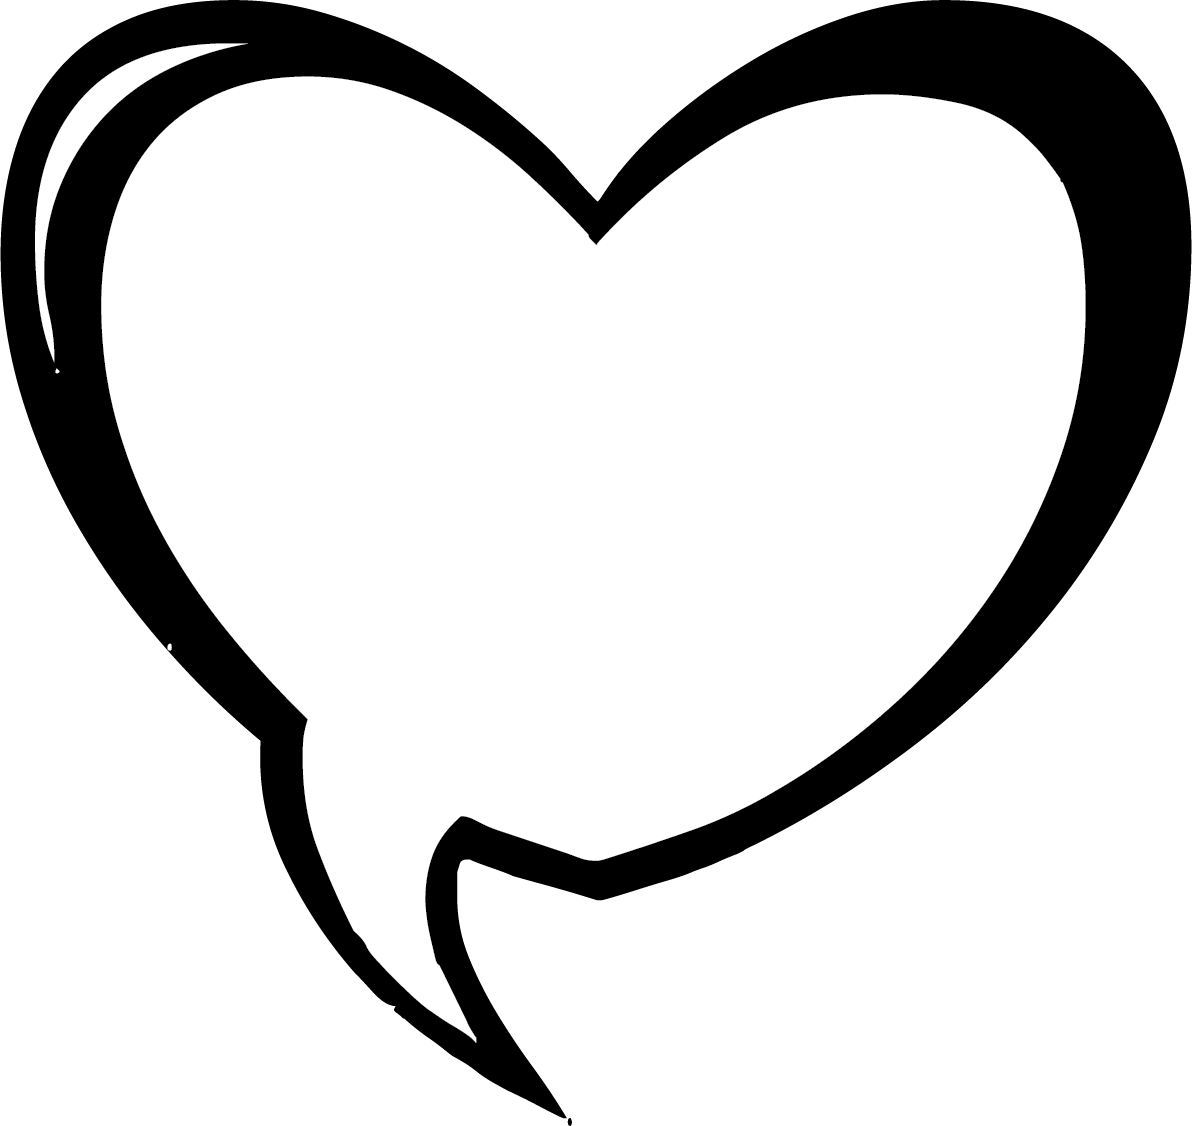 Heart Shaped Speech Bubble Graphic PNG